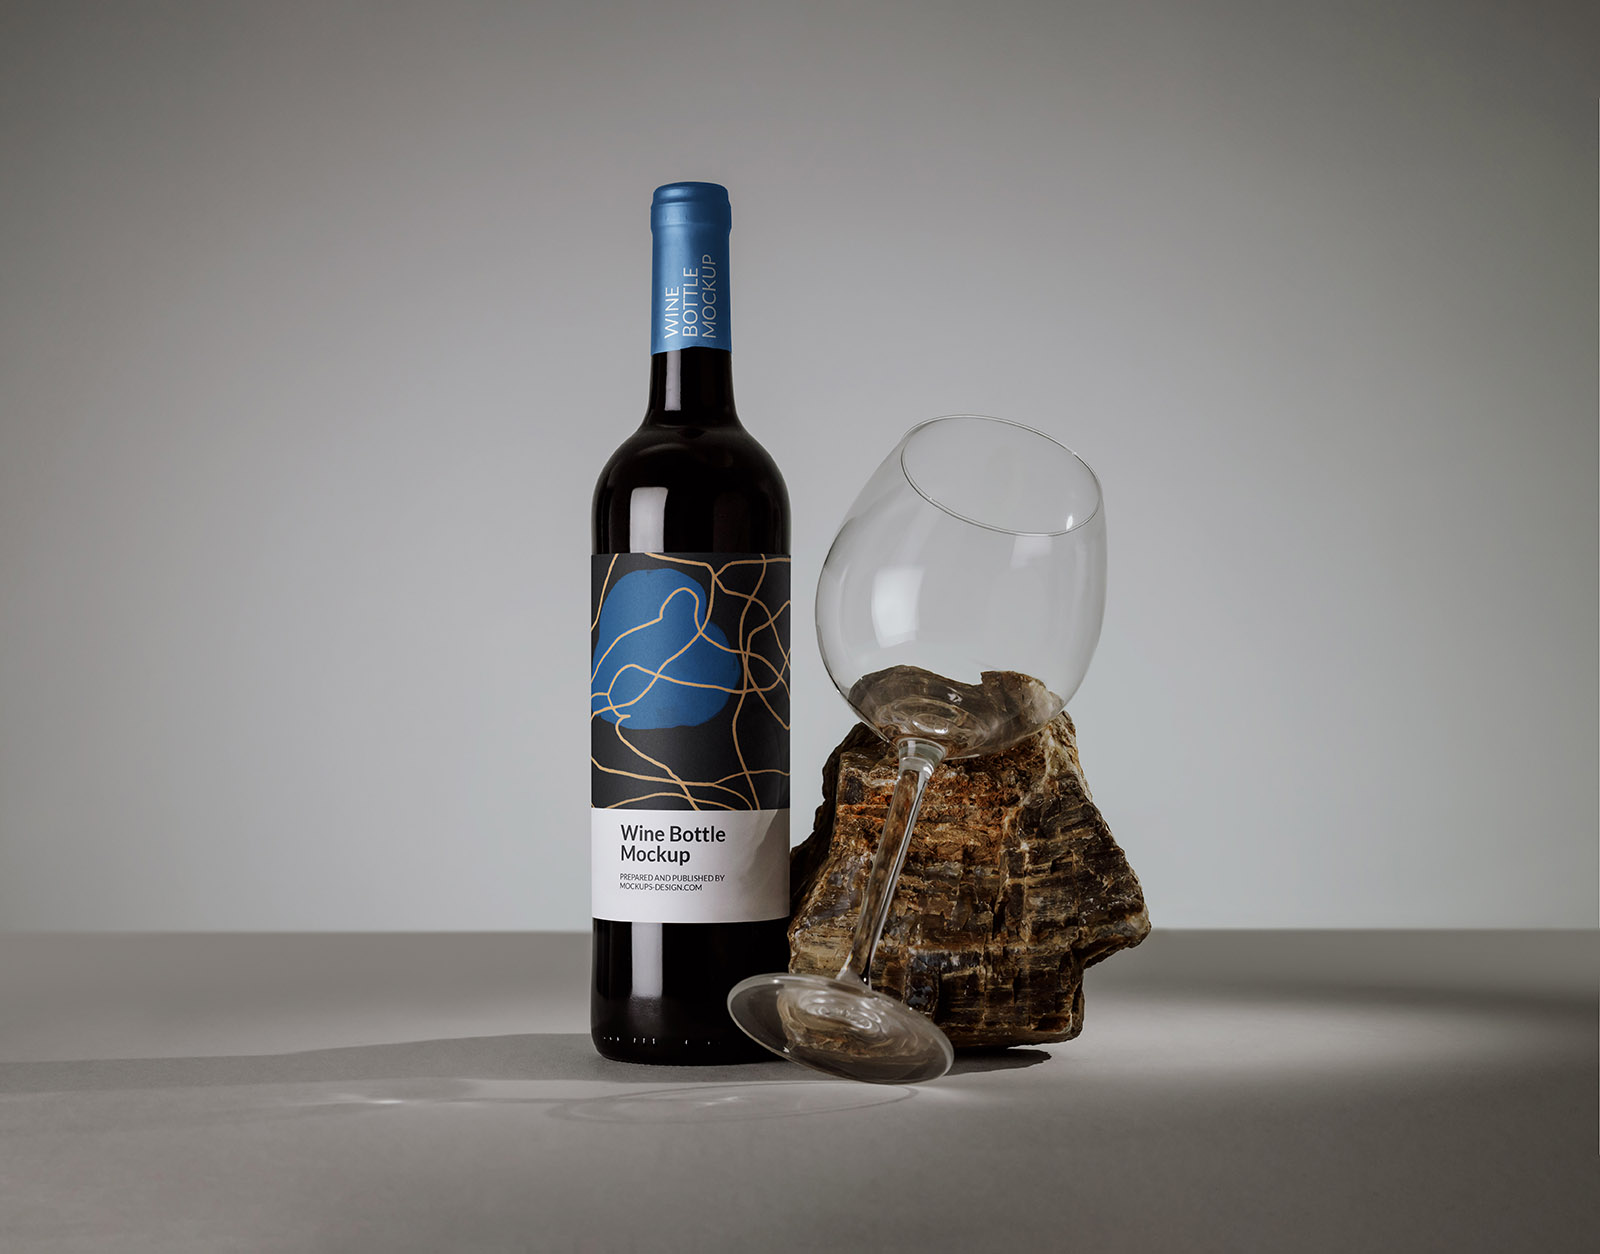 Wine bottle with a glass mockup